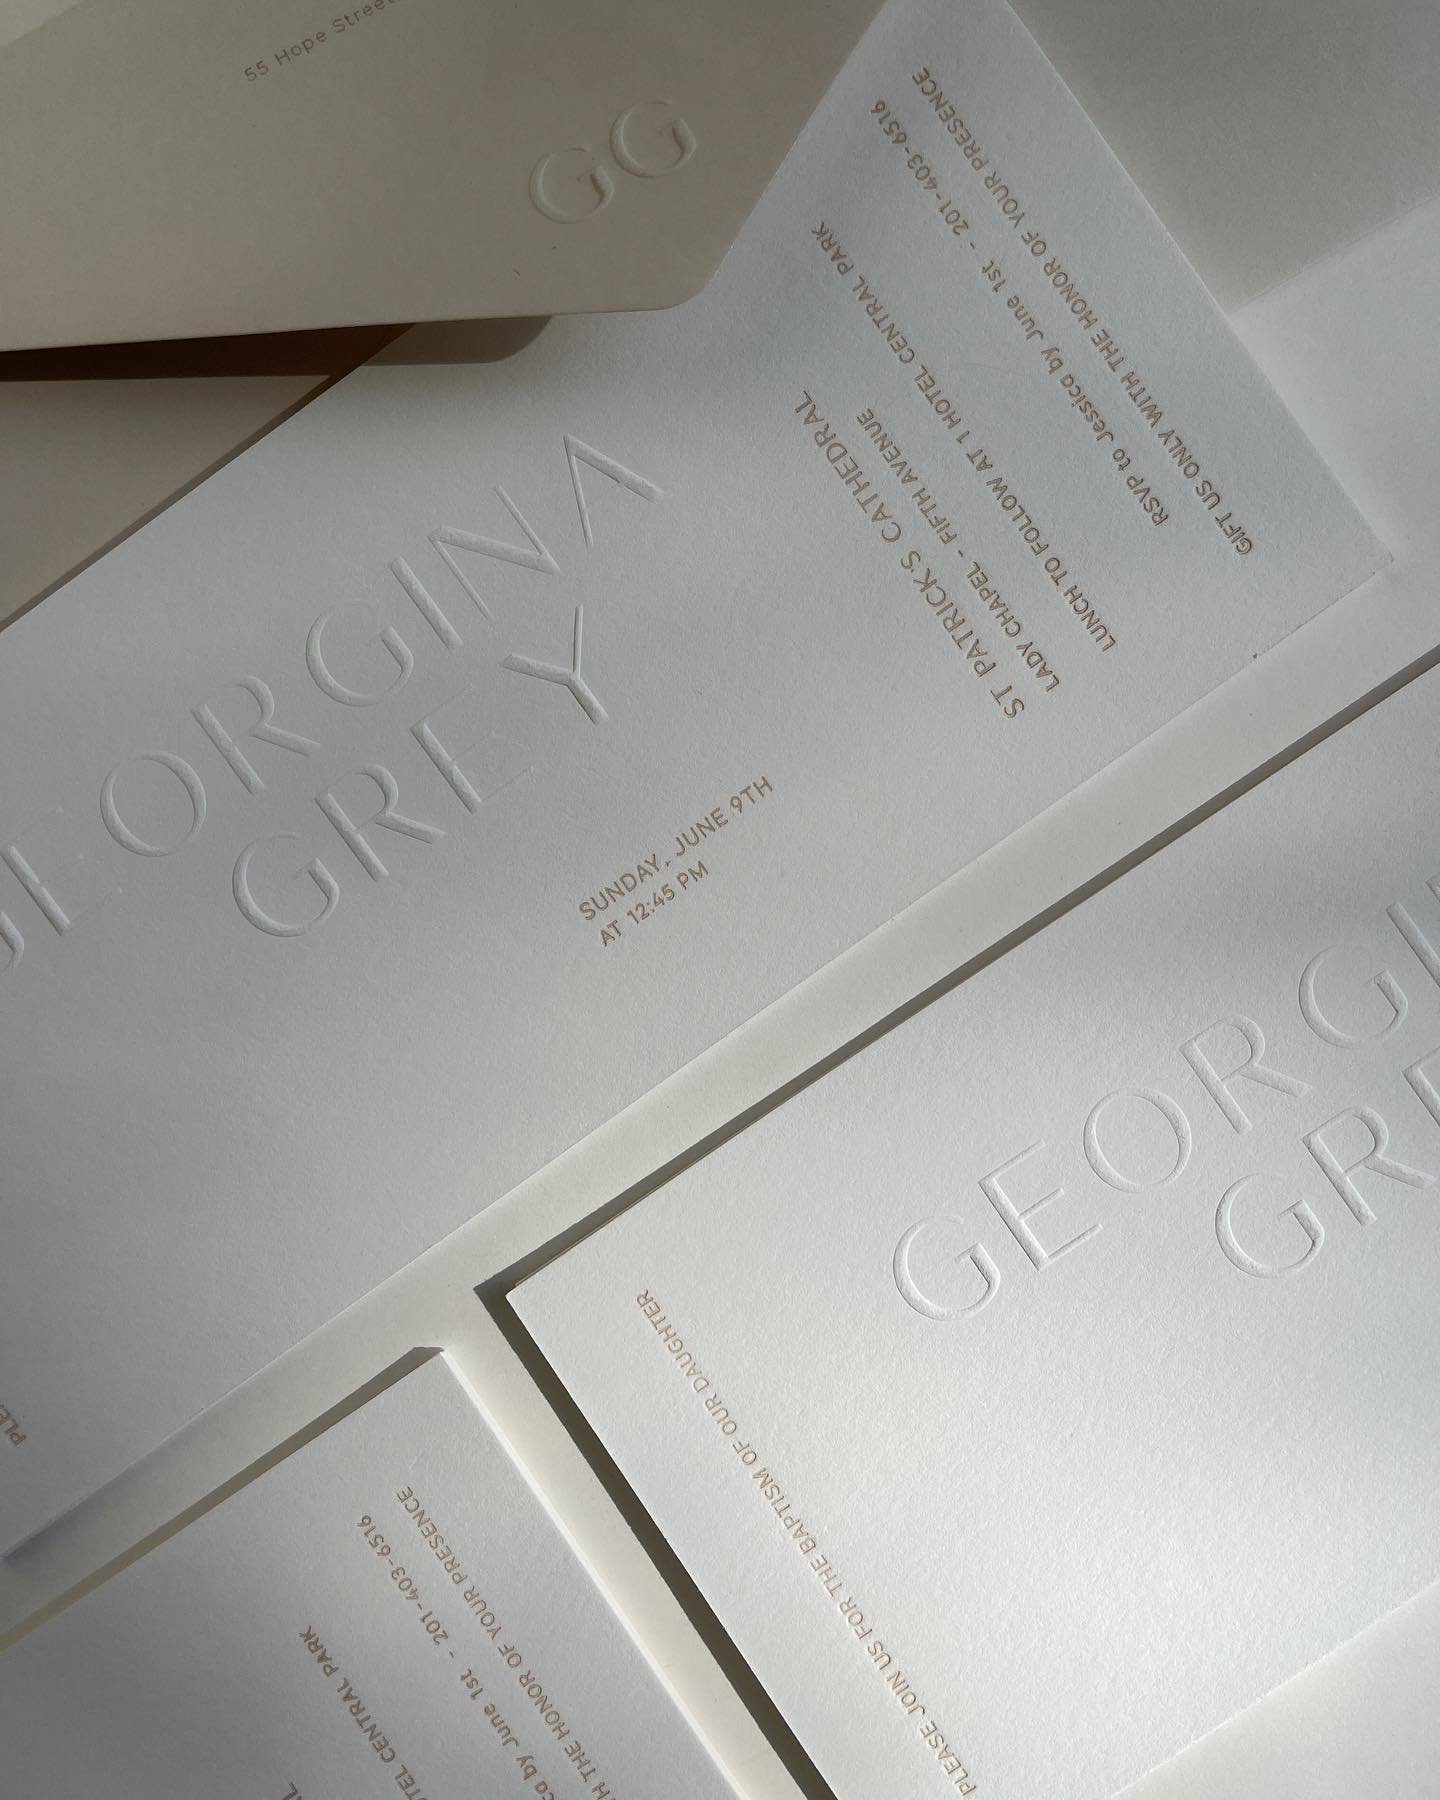 Such an honour to design and print little Georgina Grey&rsquo;s baptism invitations. I designed her parents wedding invitations a few years back and now it&rsquo;s her turn to have her own letterpress stationery. Thank you @jrac and @malcnyc 🥰
.
.
.